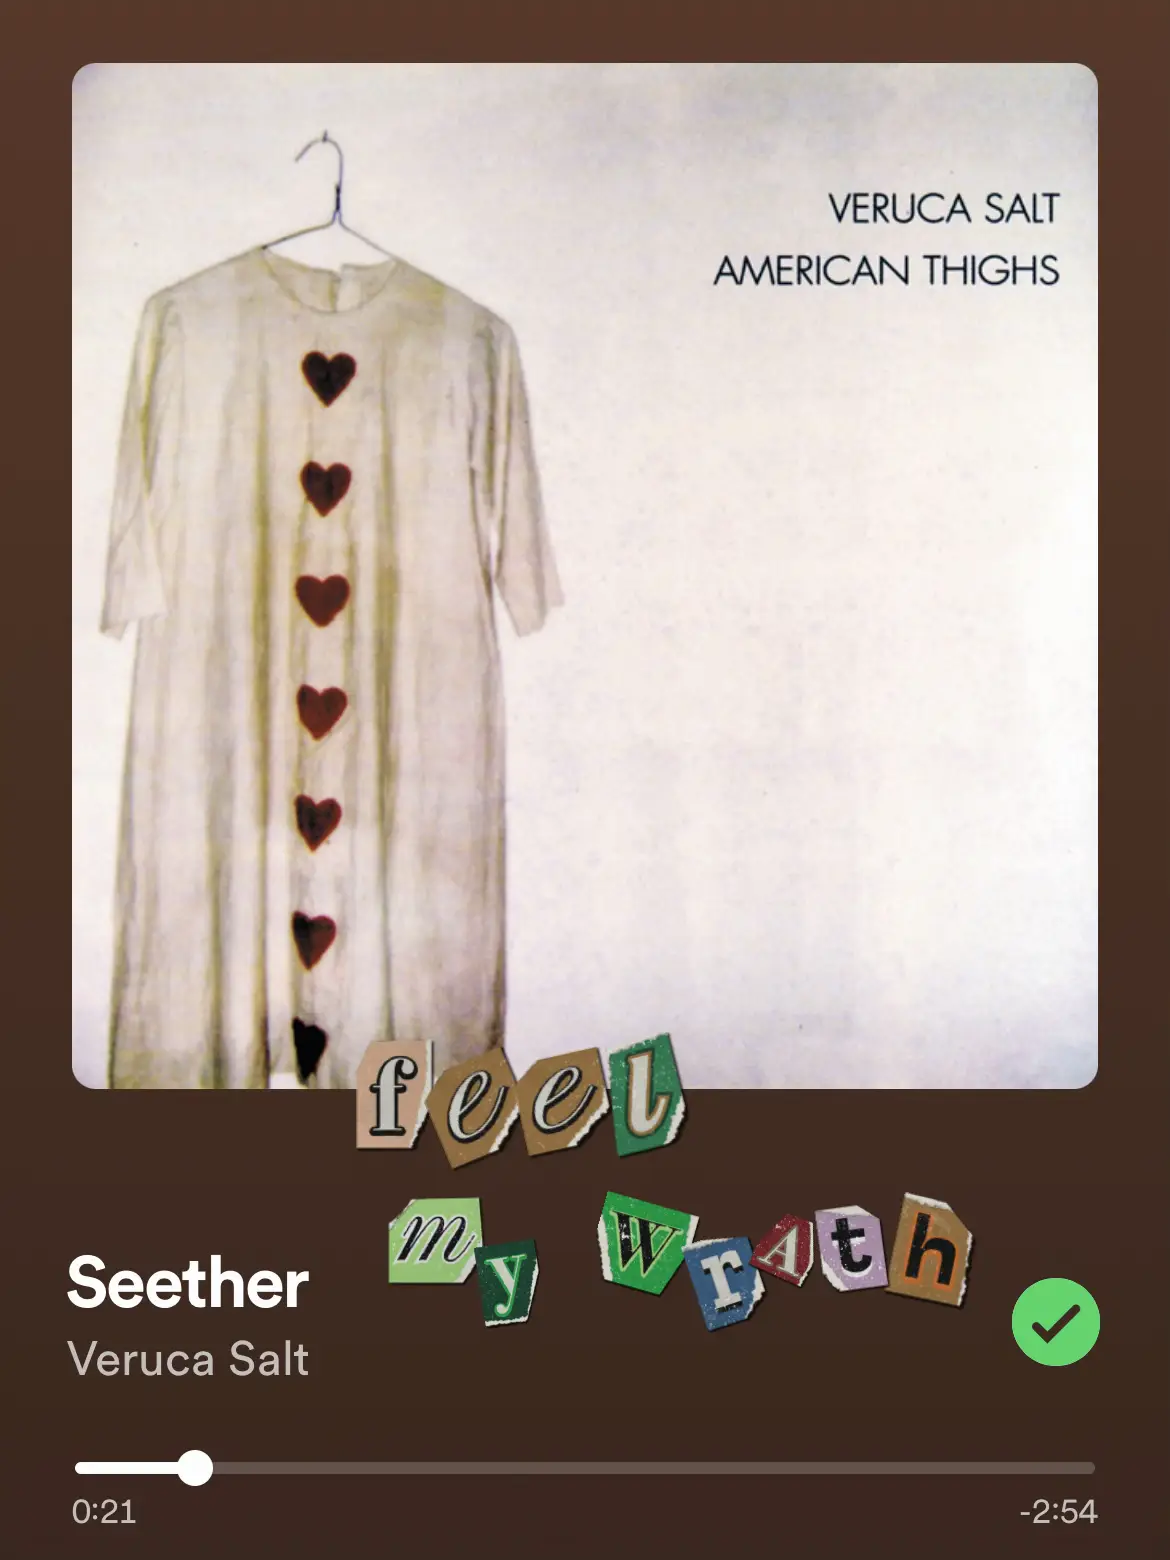  A song by Veruca Salt with the words "Feel Seether" written above it.